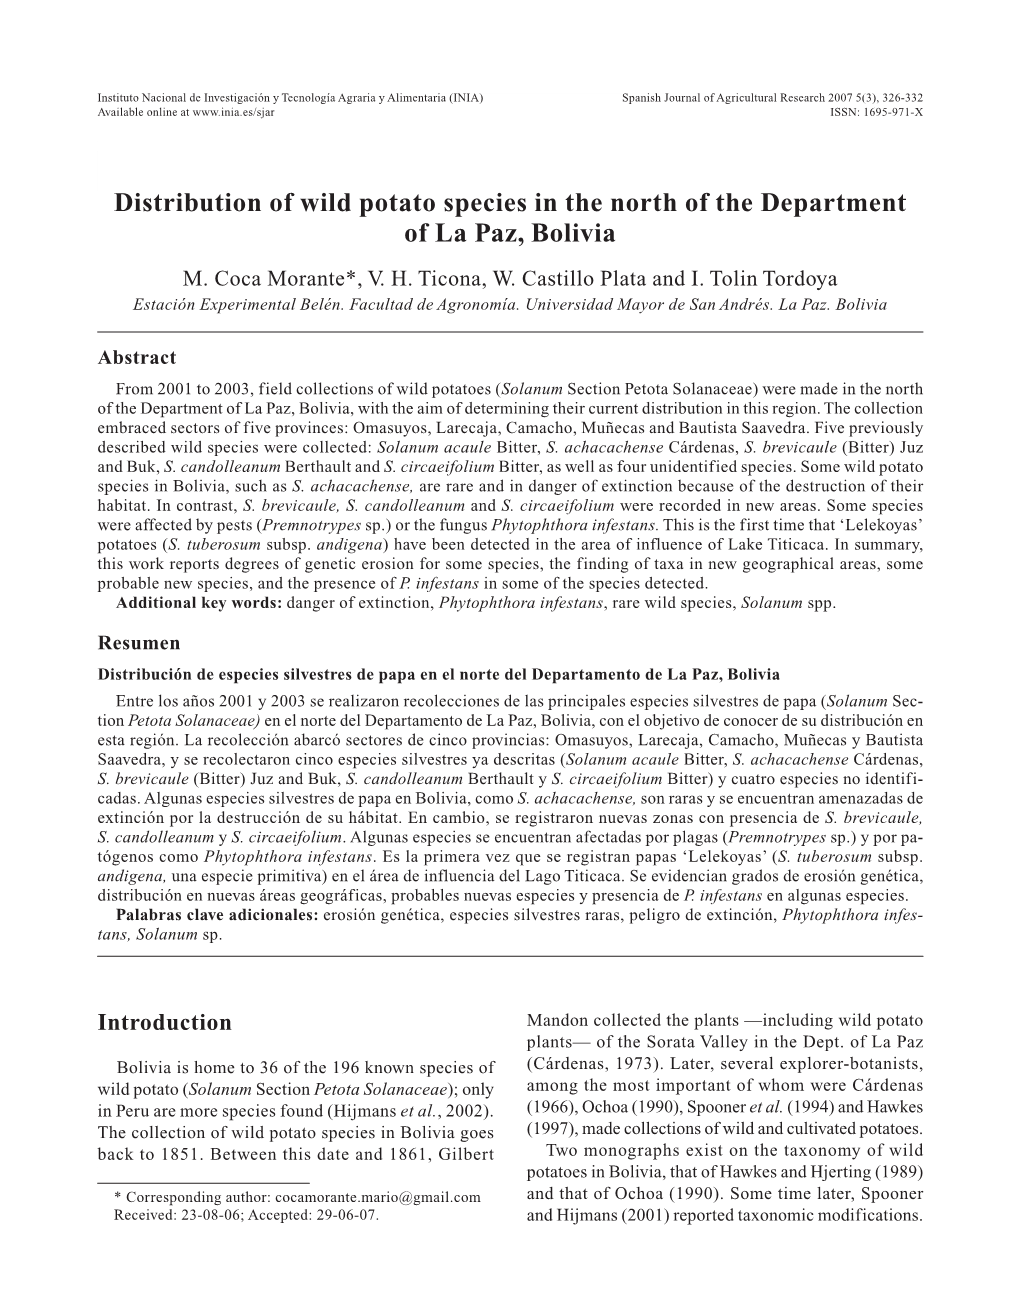 Distribution of Wild Potato Species in the North of the Department of La Paz, Bolivia M